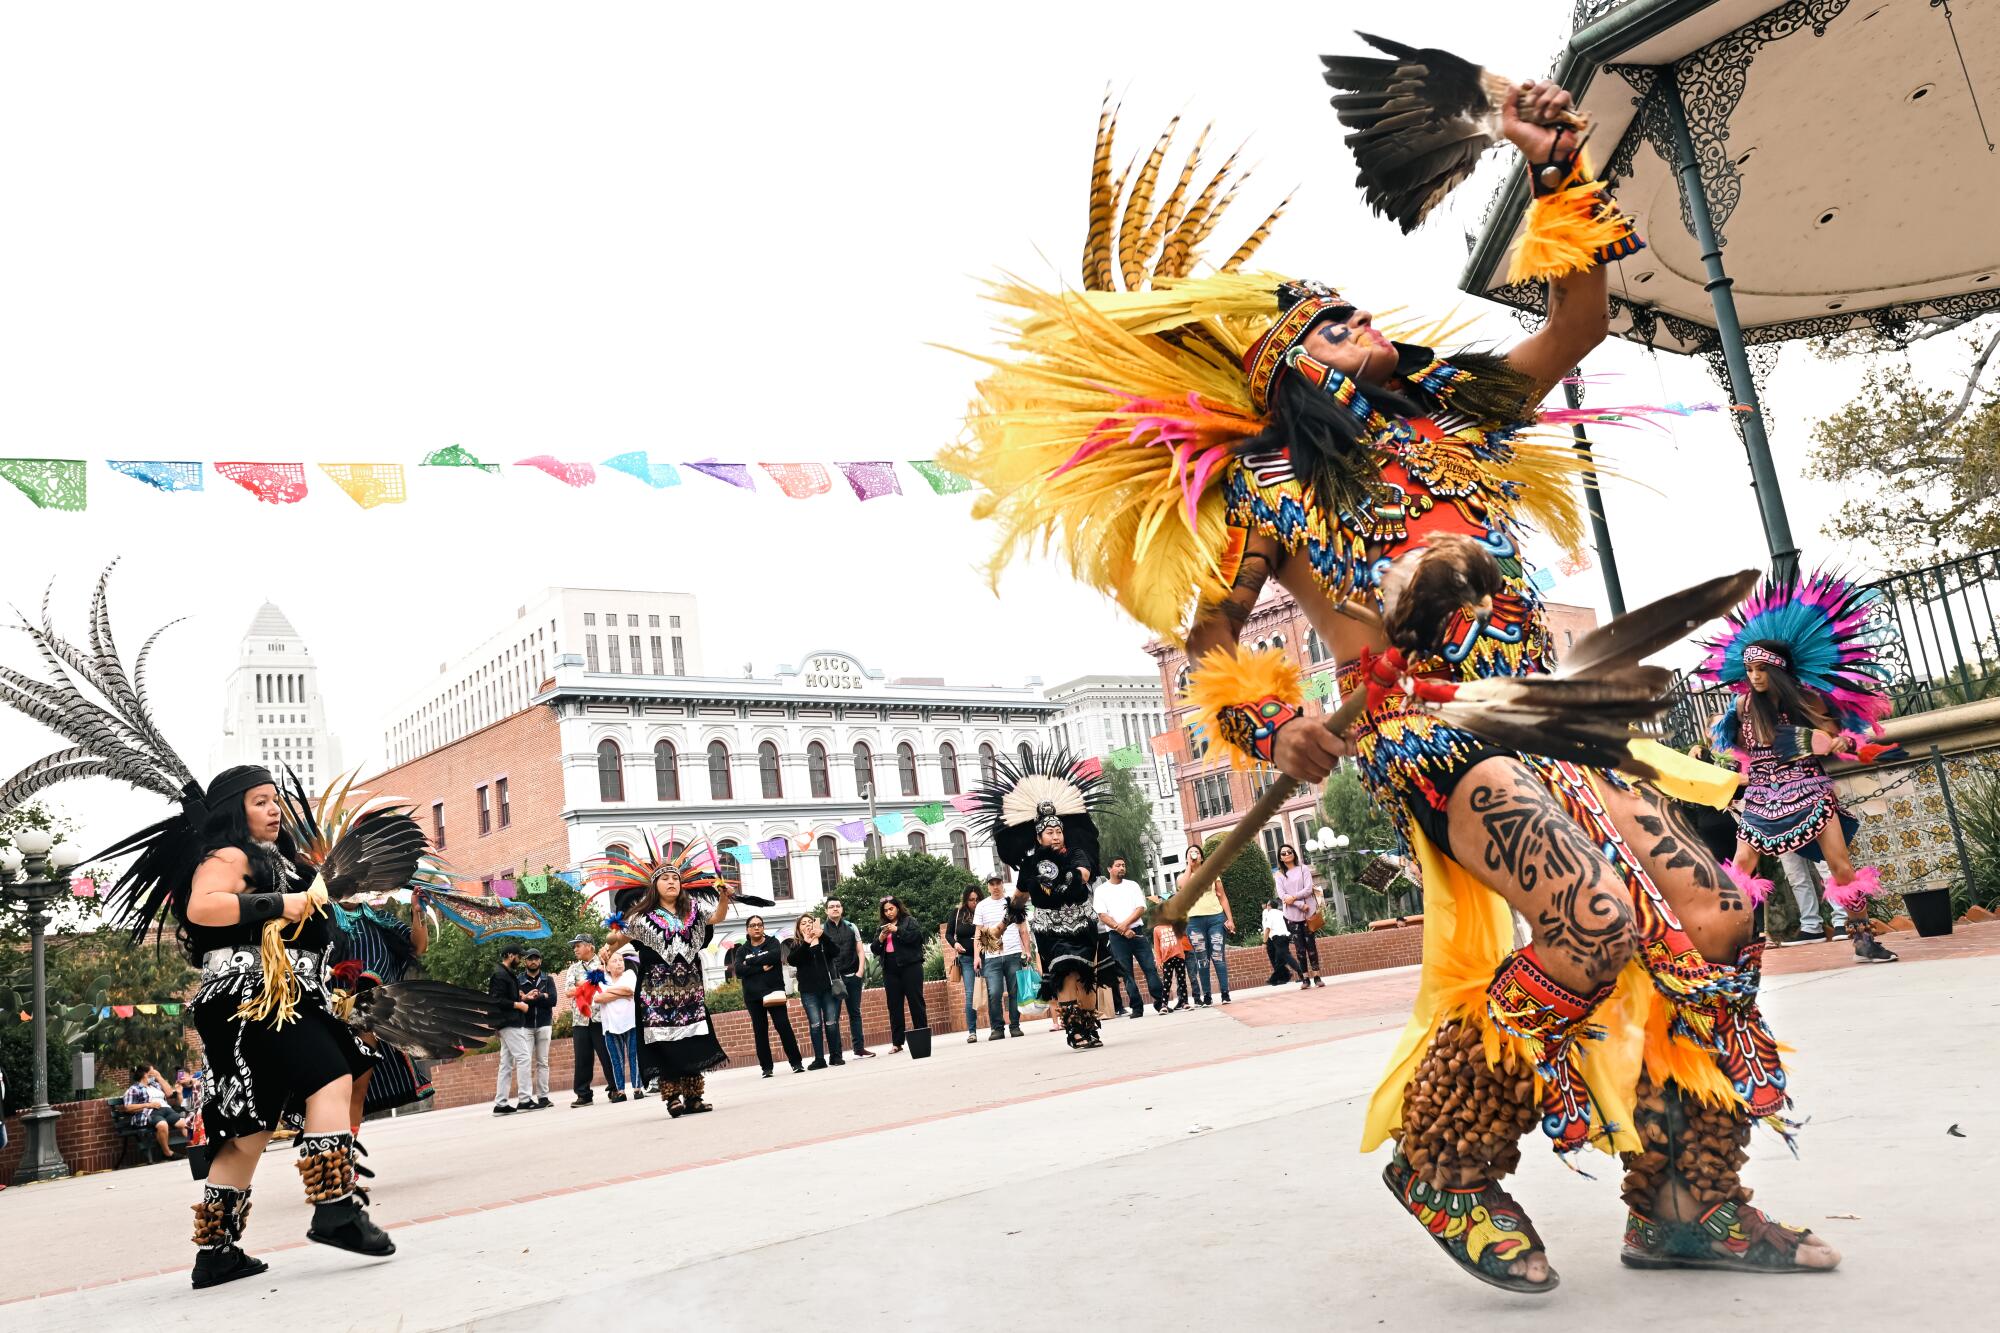 Dancers wearing feathered outfits perform in a courtyard while a group of people looks on.